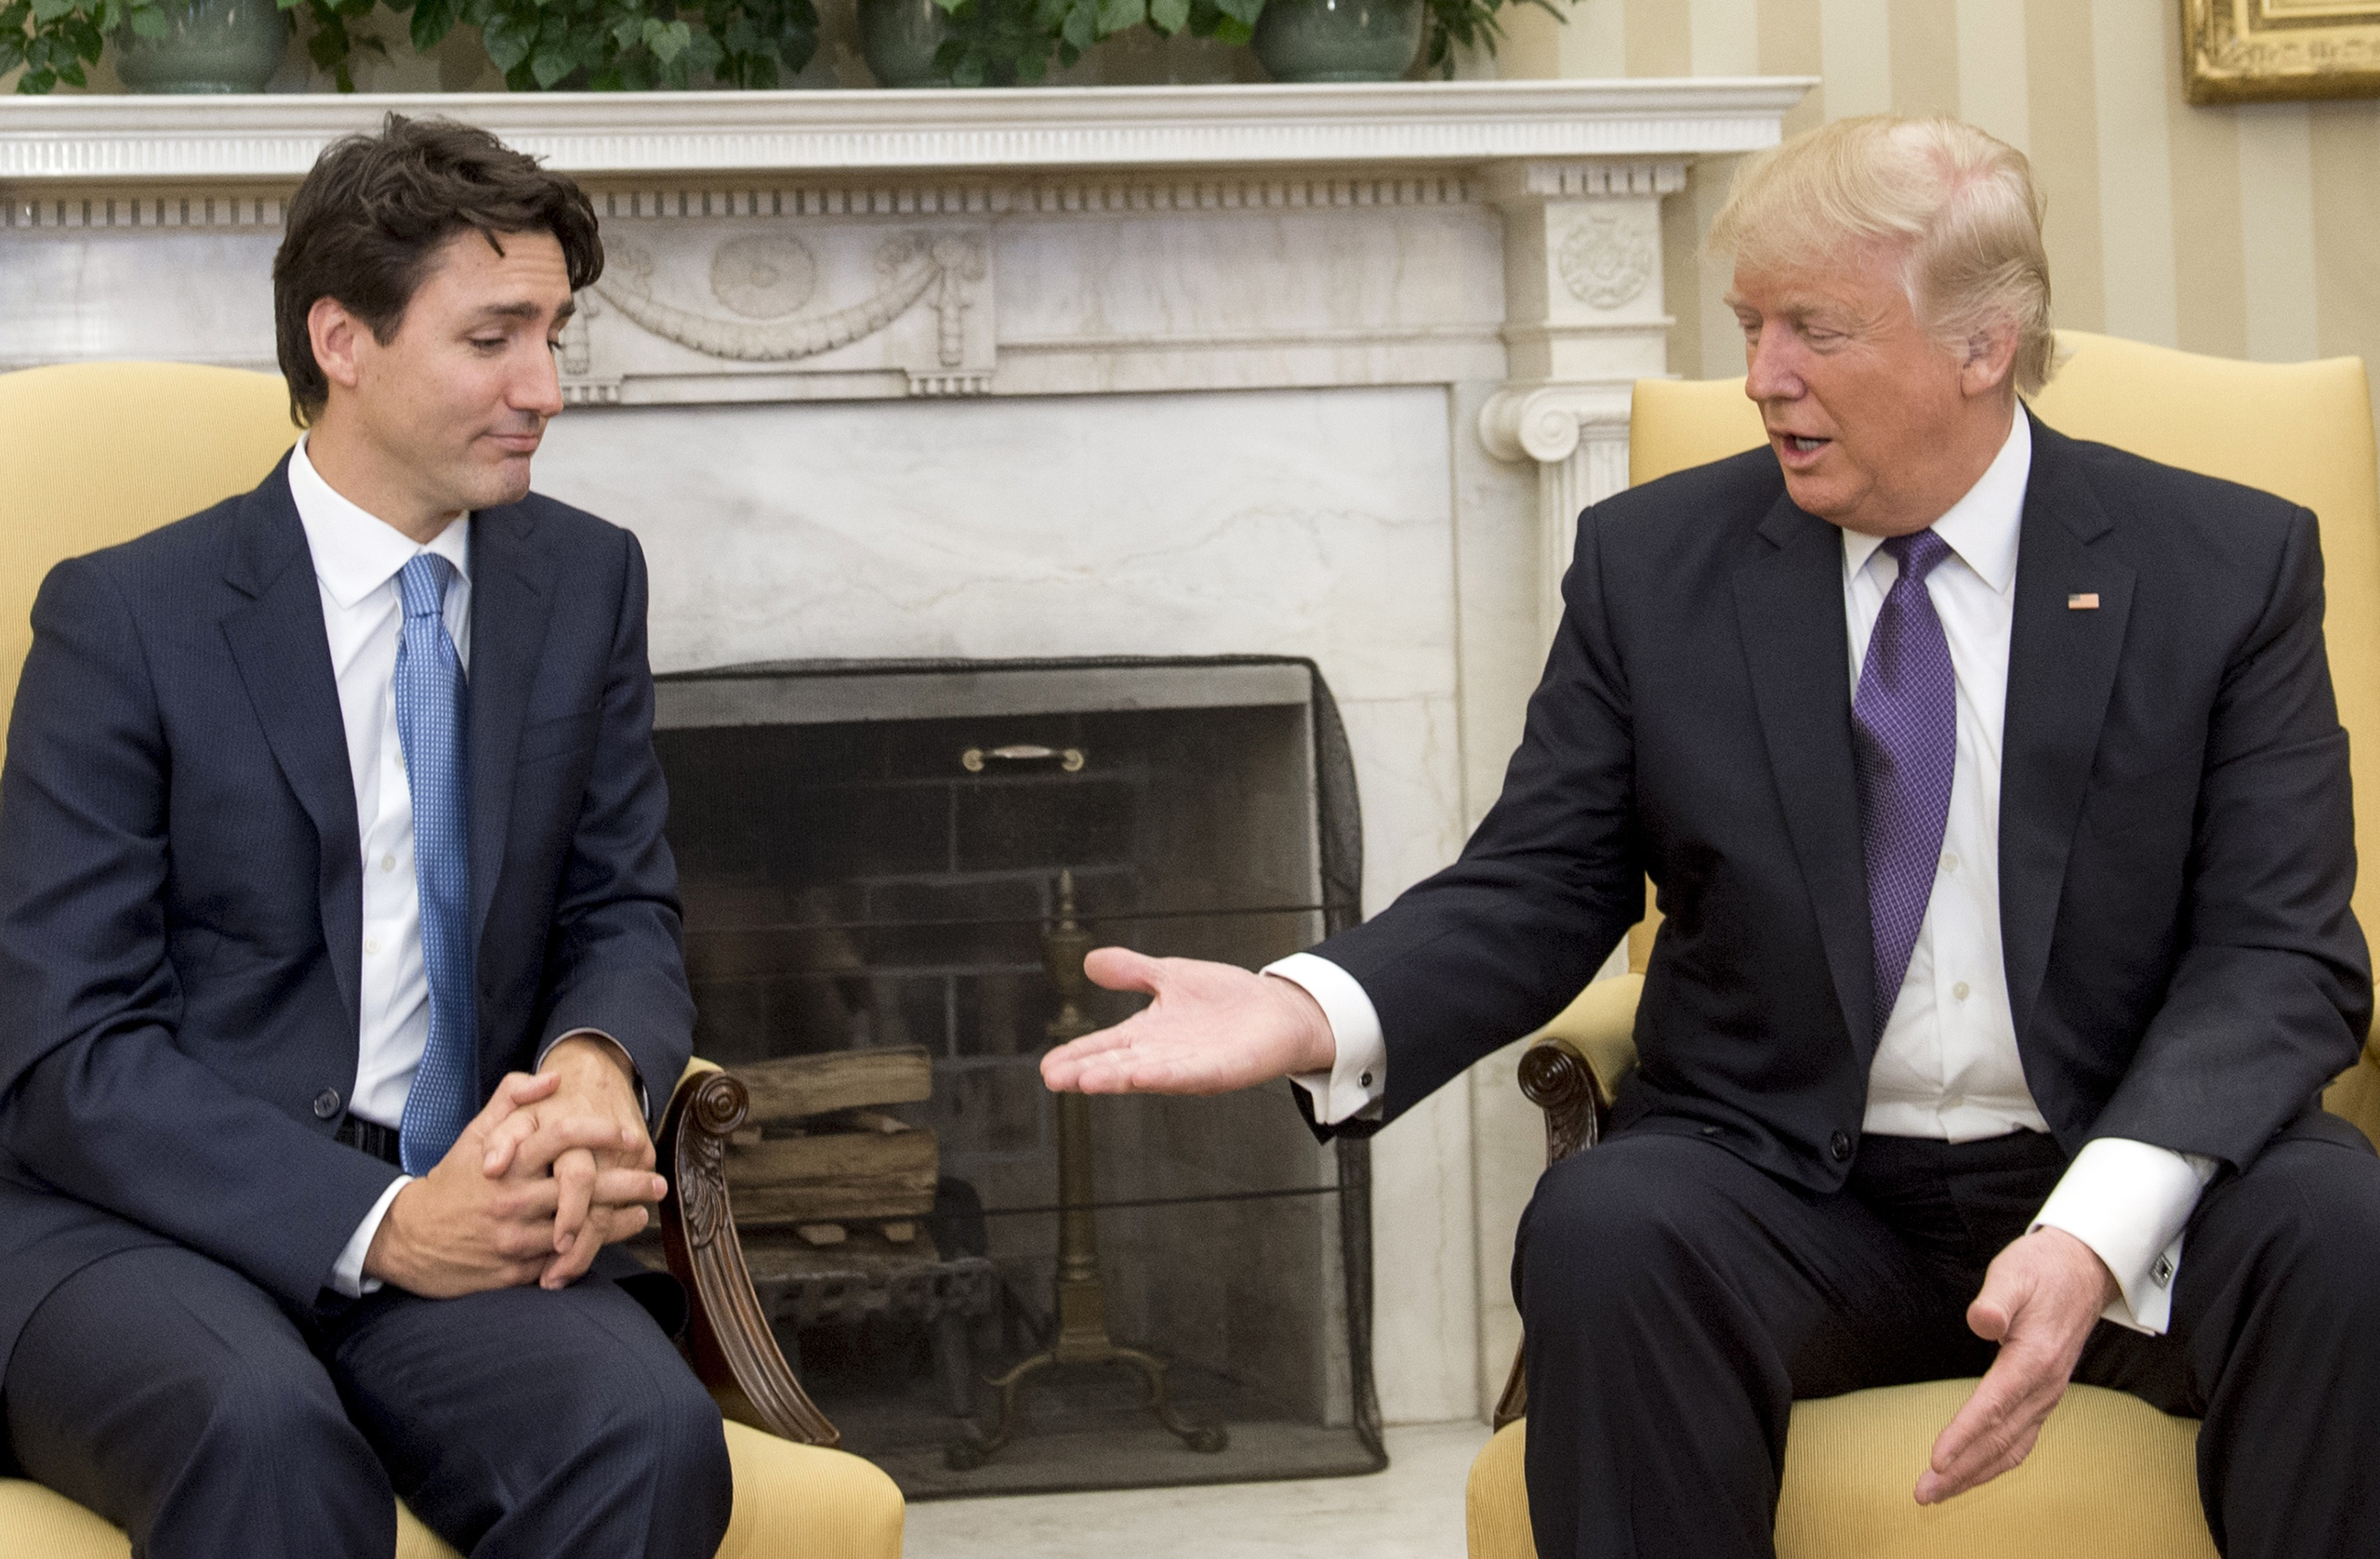 US President Donald Trump and Canadian Prime Minister Justin Trudeau before they shake hands during a meeting in the Oval Office of the White House in Washington, DC, on February 13, 2017.